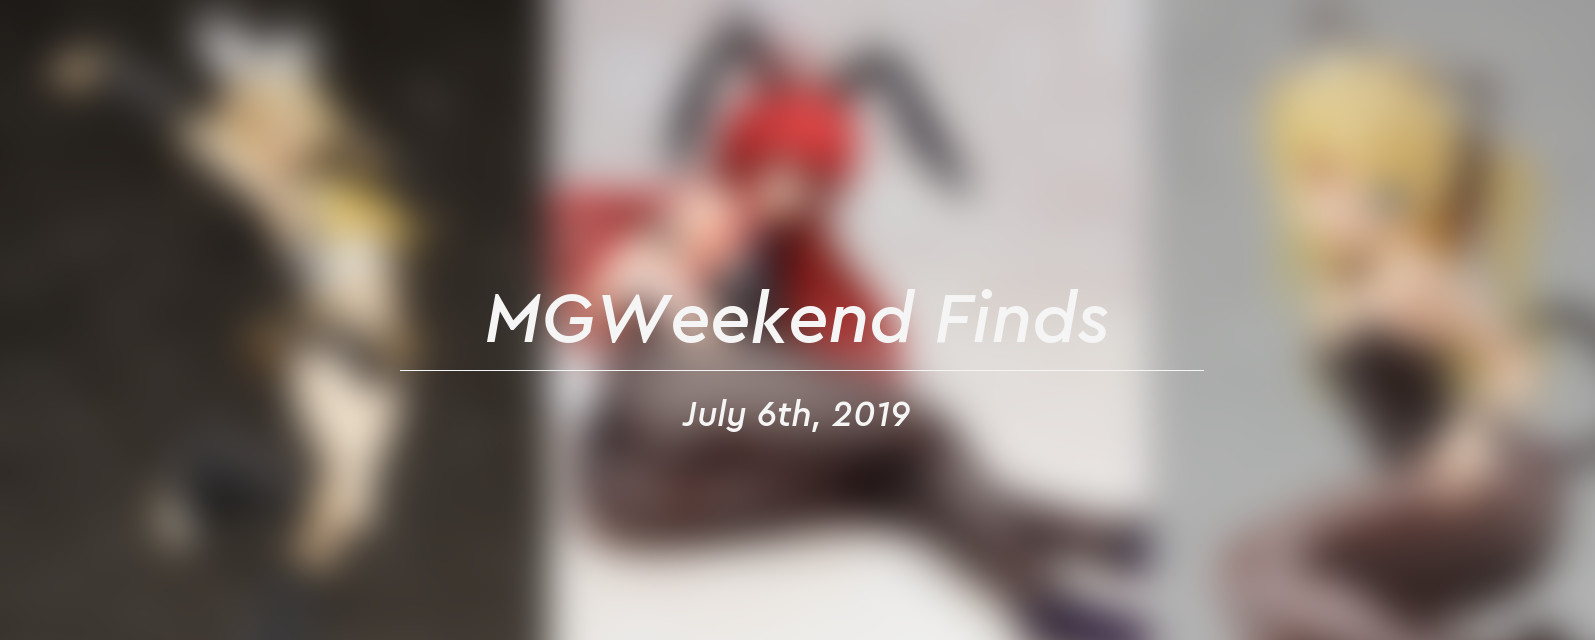 MGWeekend Finds July 6th 2019